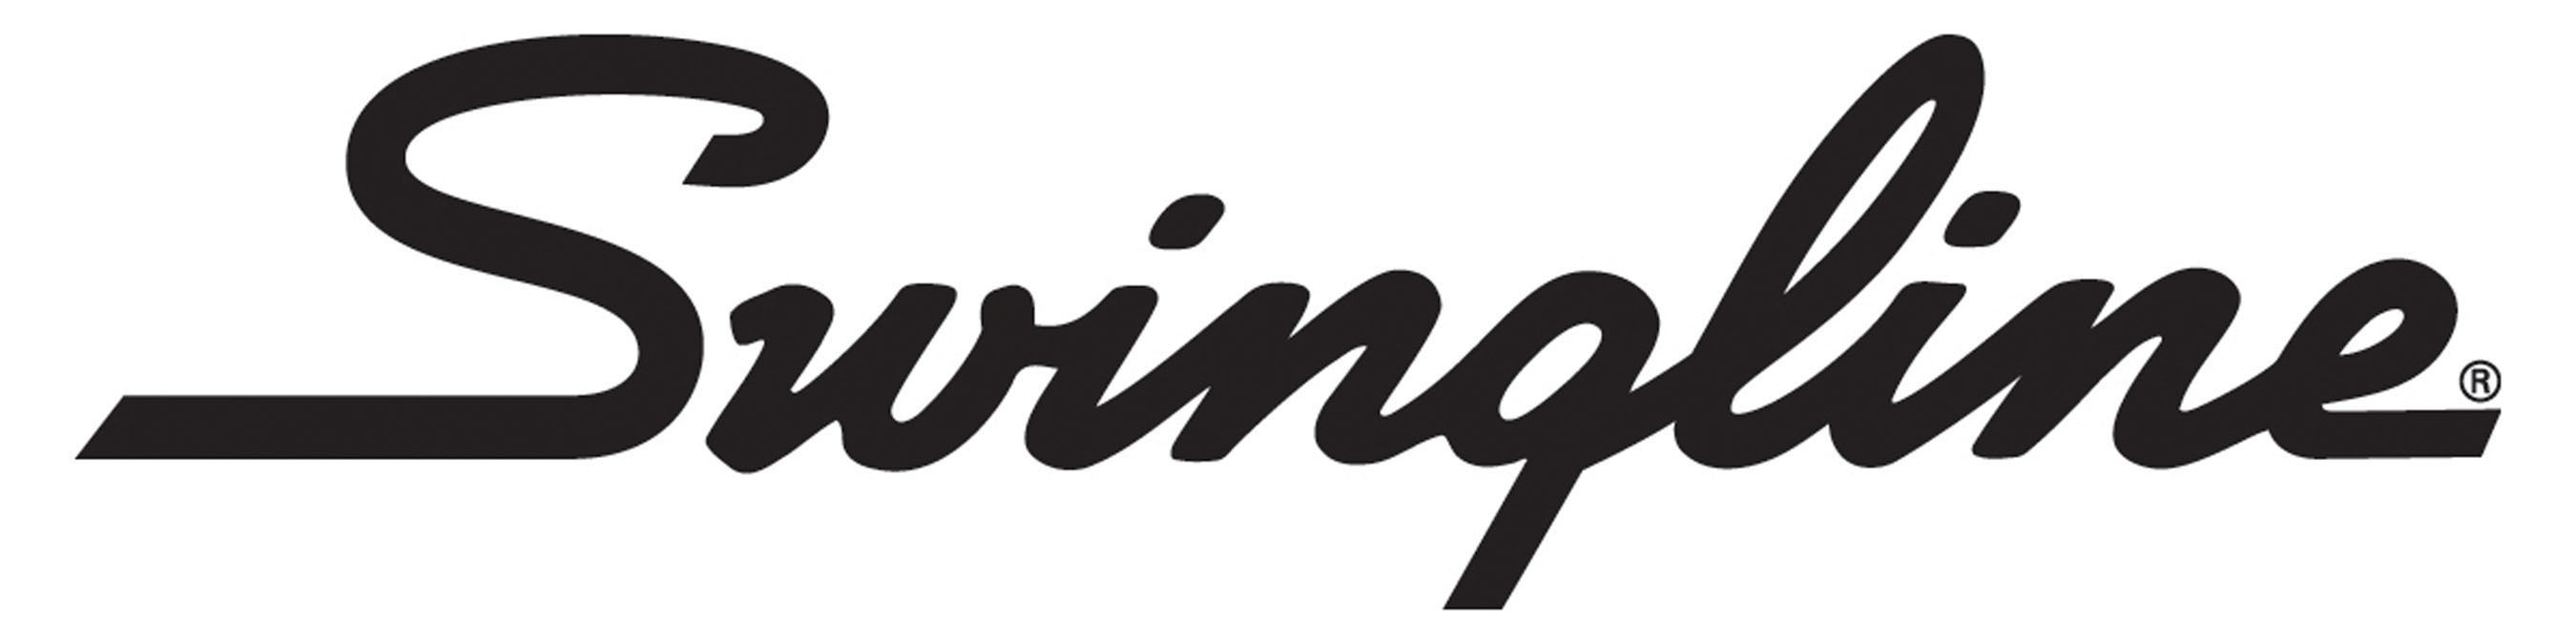 Swingline is a leading brand in workspace tools for the business, home and mobile office. For more information, please visit www.swingline.com.